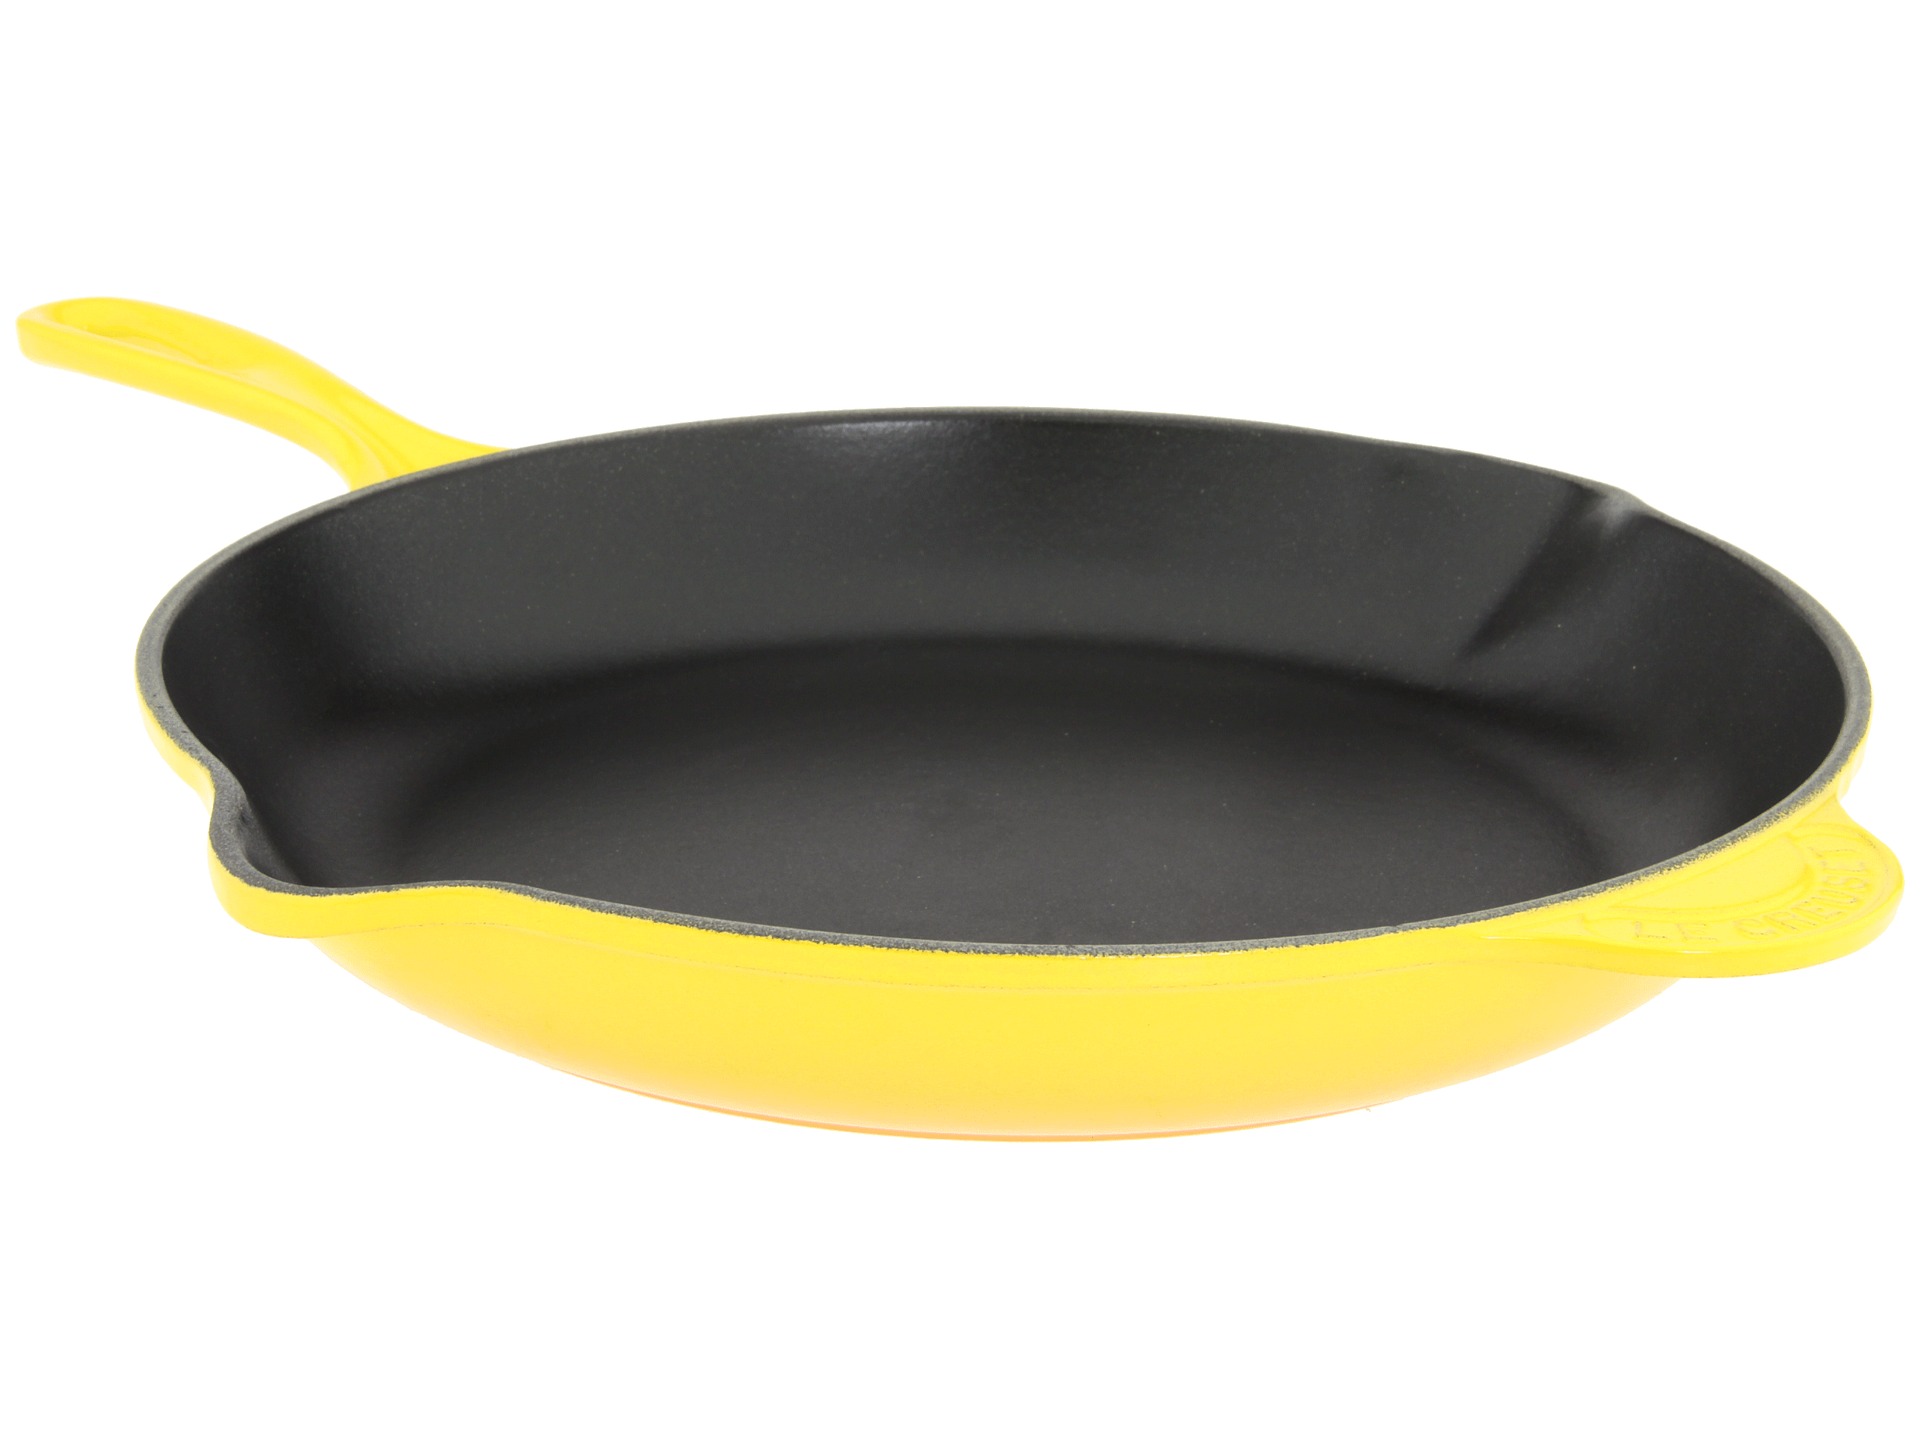 Le Creuset 11.75 Iron Handle Skillet    BOTH 